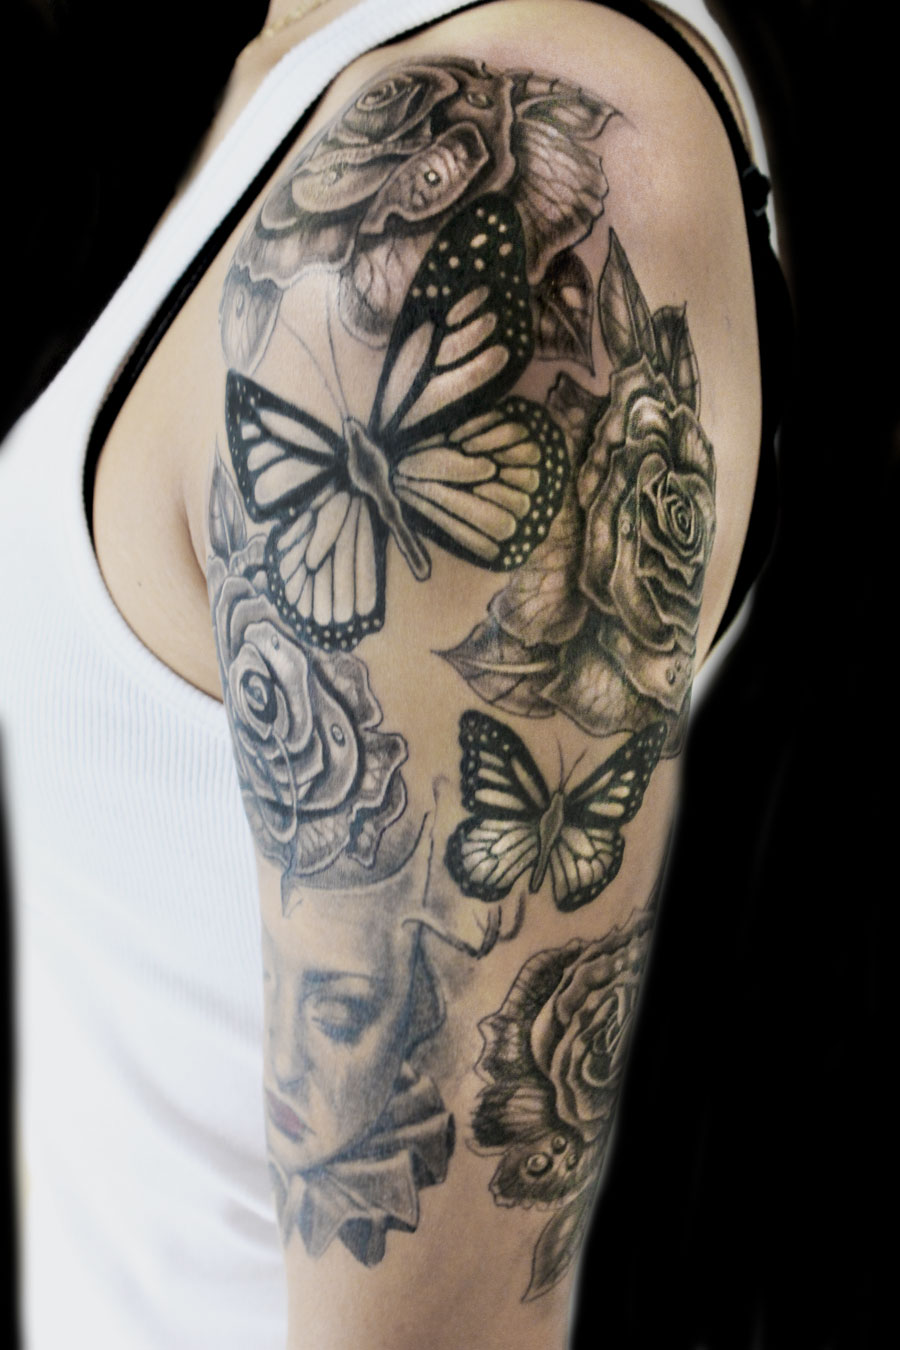 Roses and a butterfly tattoo tattoos tattooed ink color butterfly  upperlevelink erniealvarado fontana realism realismtattoo  Instagram